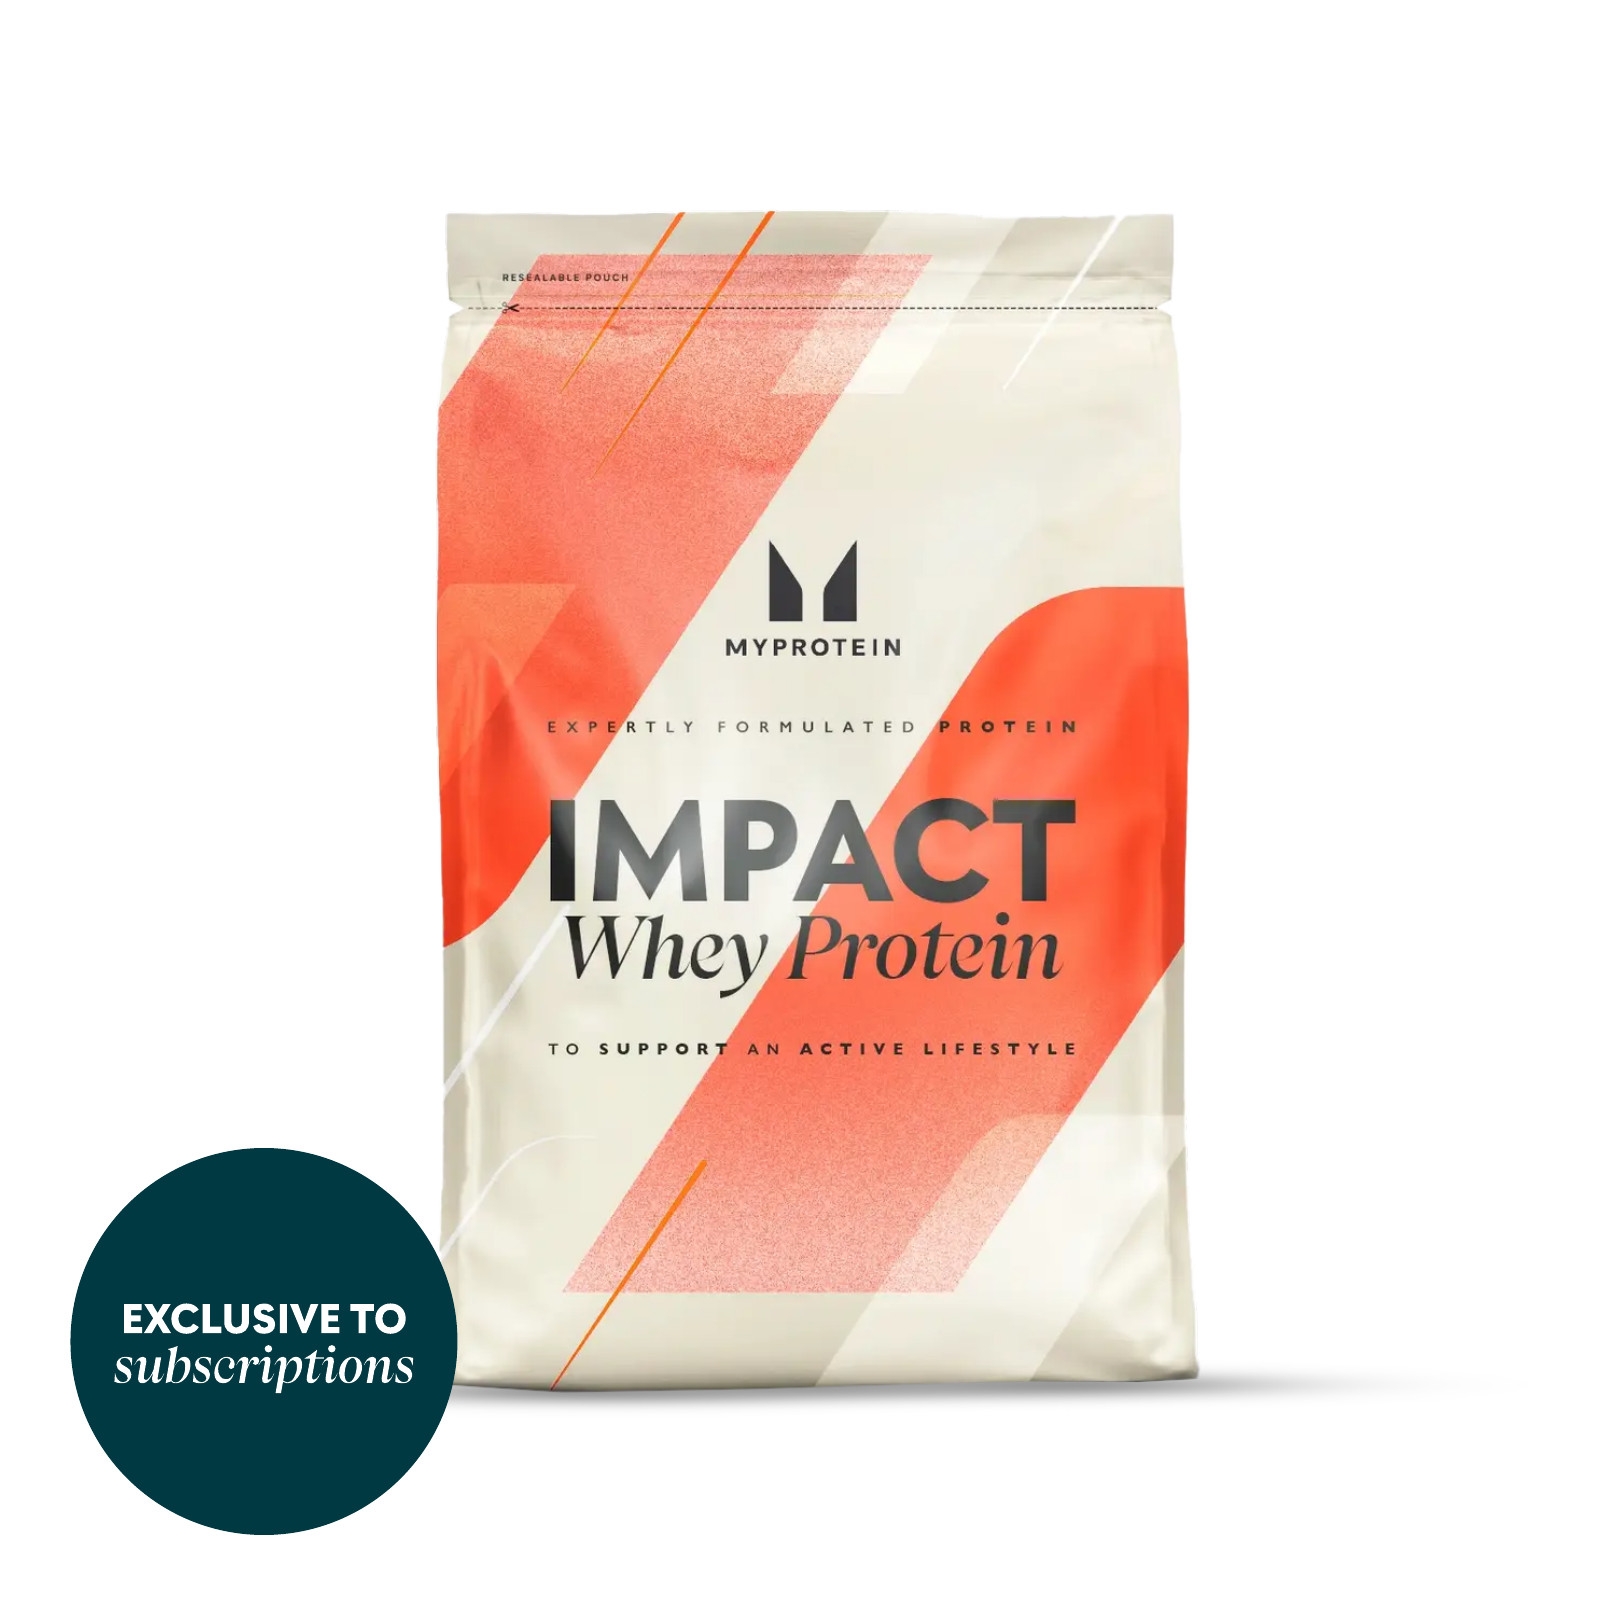 Impact Whey Protein (500g) Subscription Exclusive